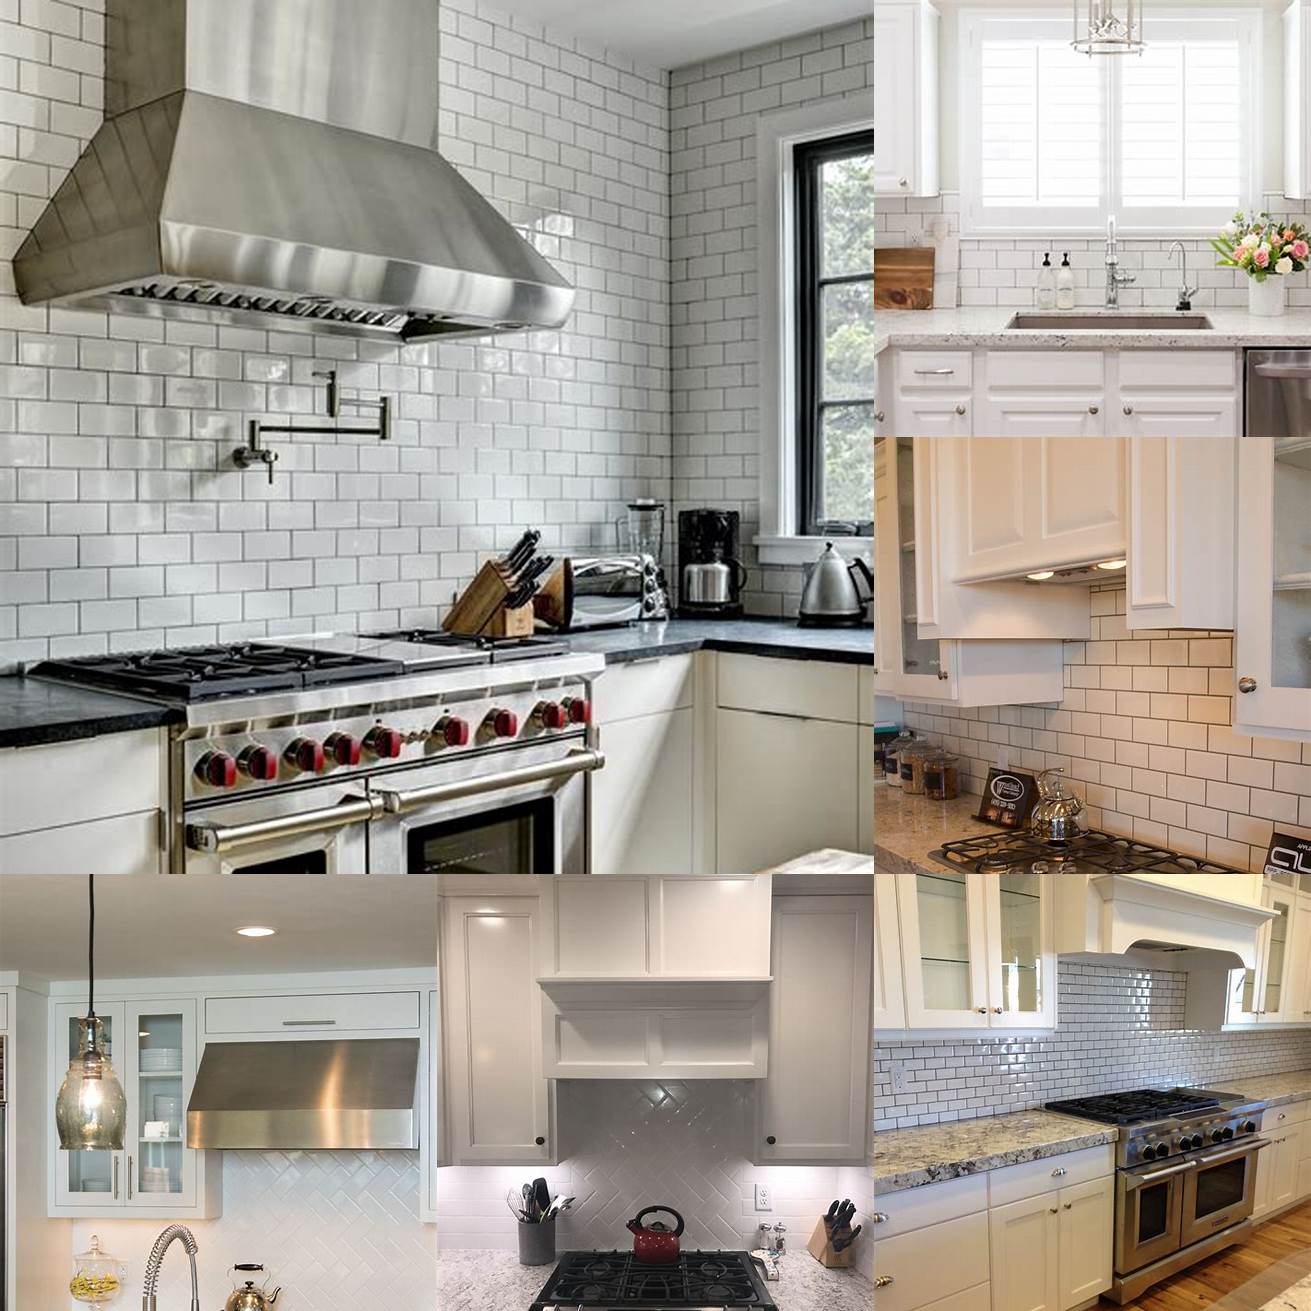 A white kitchen with subway tile backsplash is classic and timeless